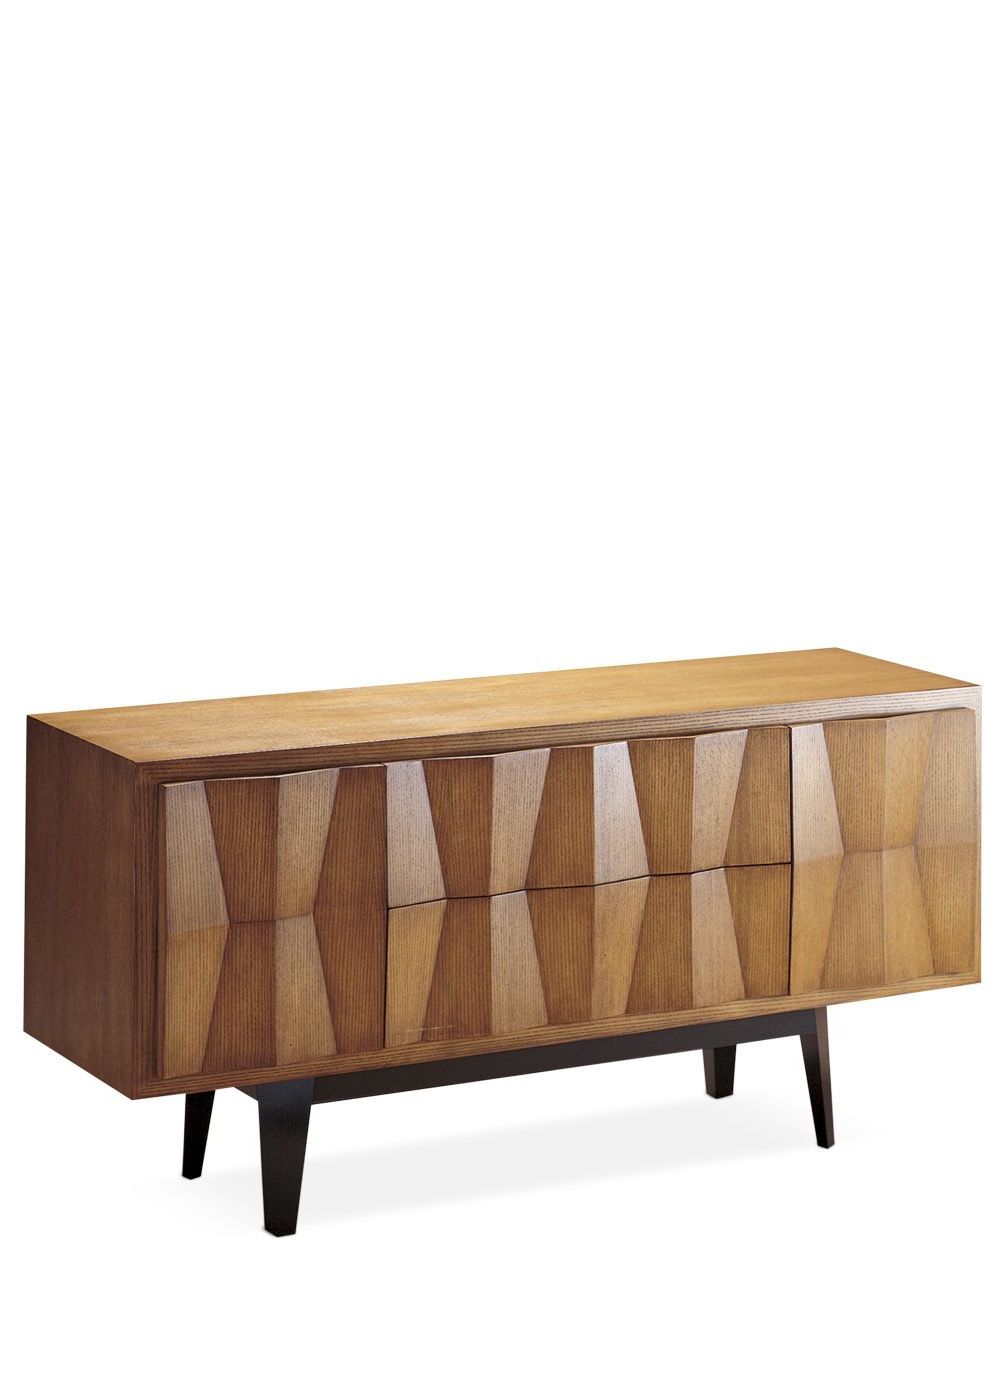 Edo Credenza (#t0308)therien | Chests & Commodes Regarding Womack Sideboards (Gallery 9 of 20)